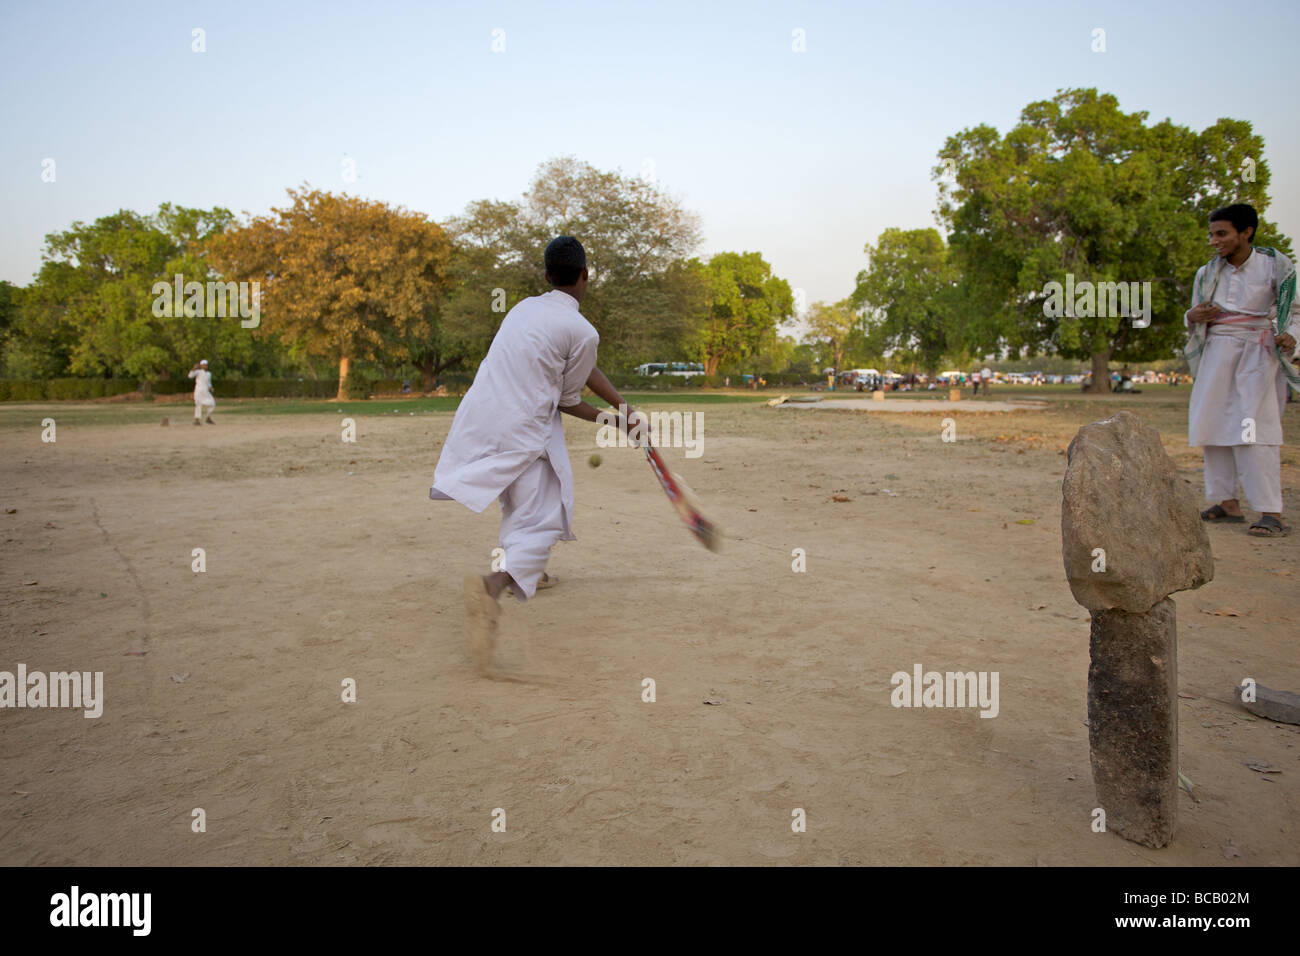 Boys playing cricket in a New Delhi park, India Stock Photo